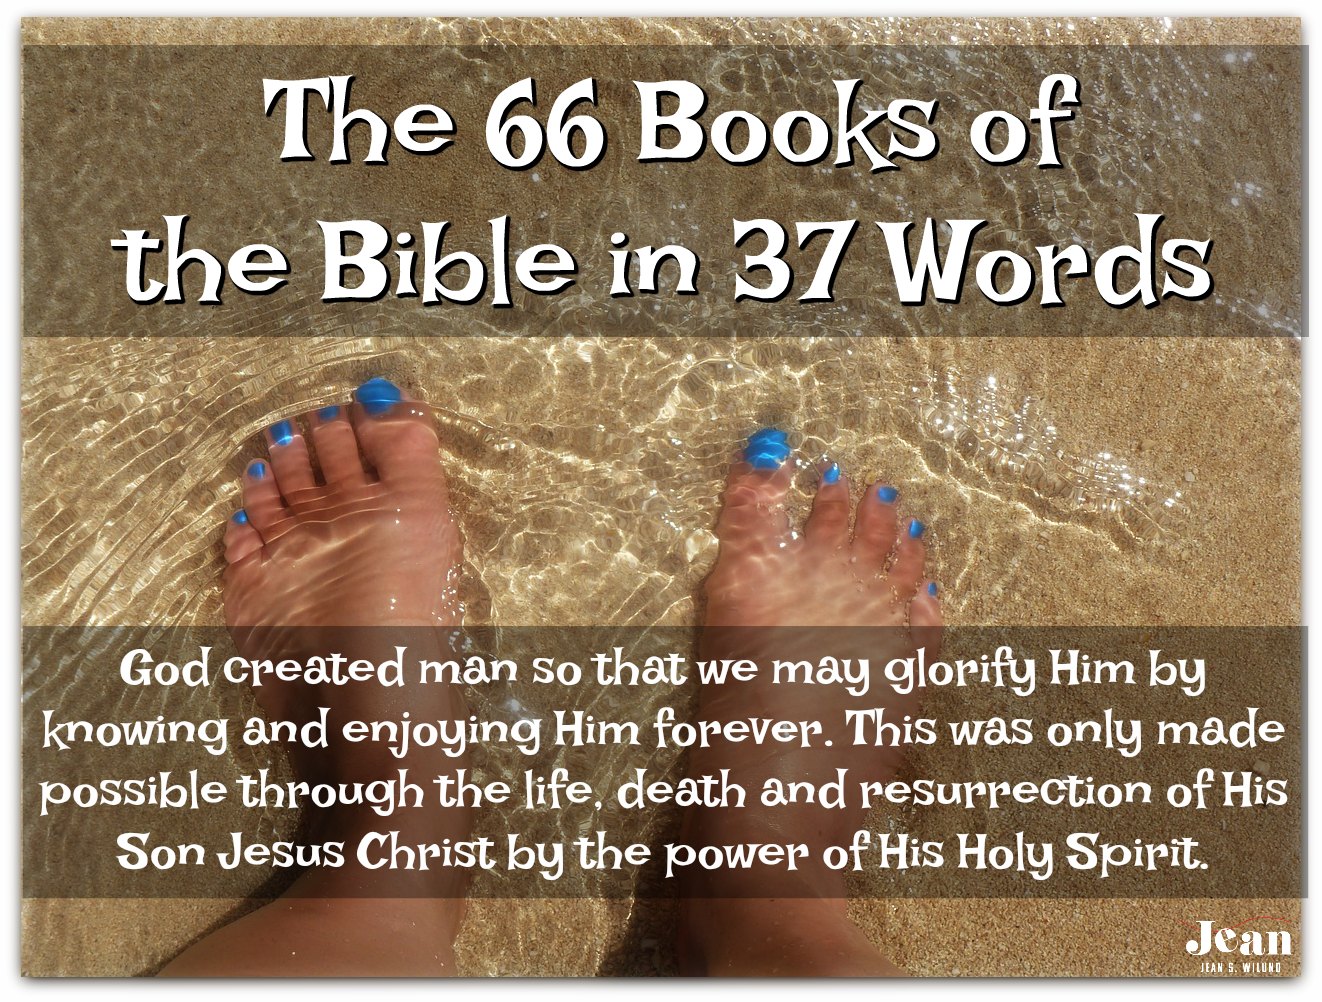 The 66 Books of Bible in 37 Words (Welcome to the Bible series) via www.JeanWilund.com